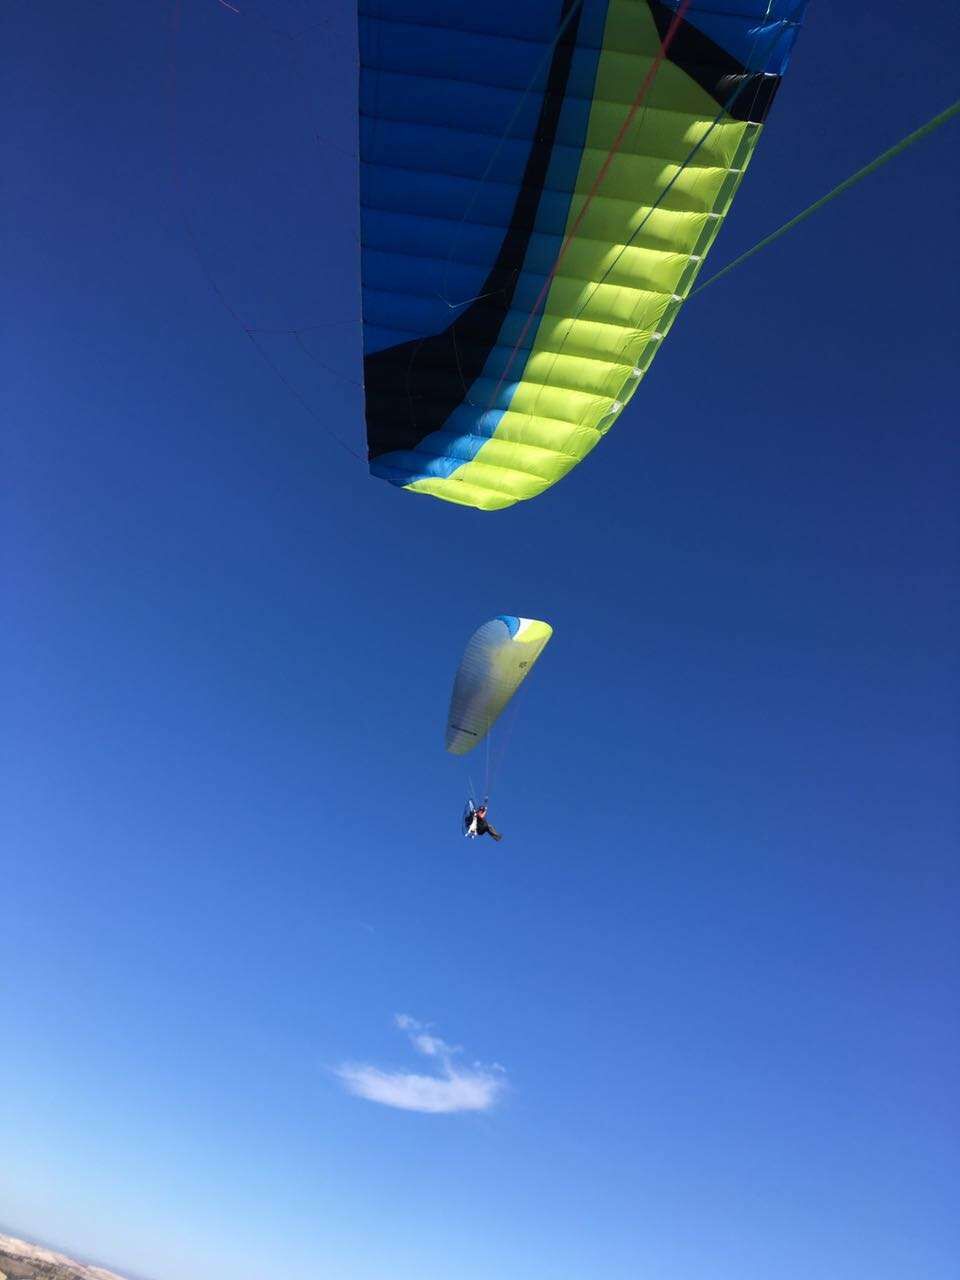 Whats the best way to learn to Paramotor?